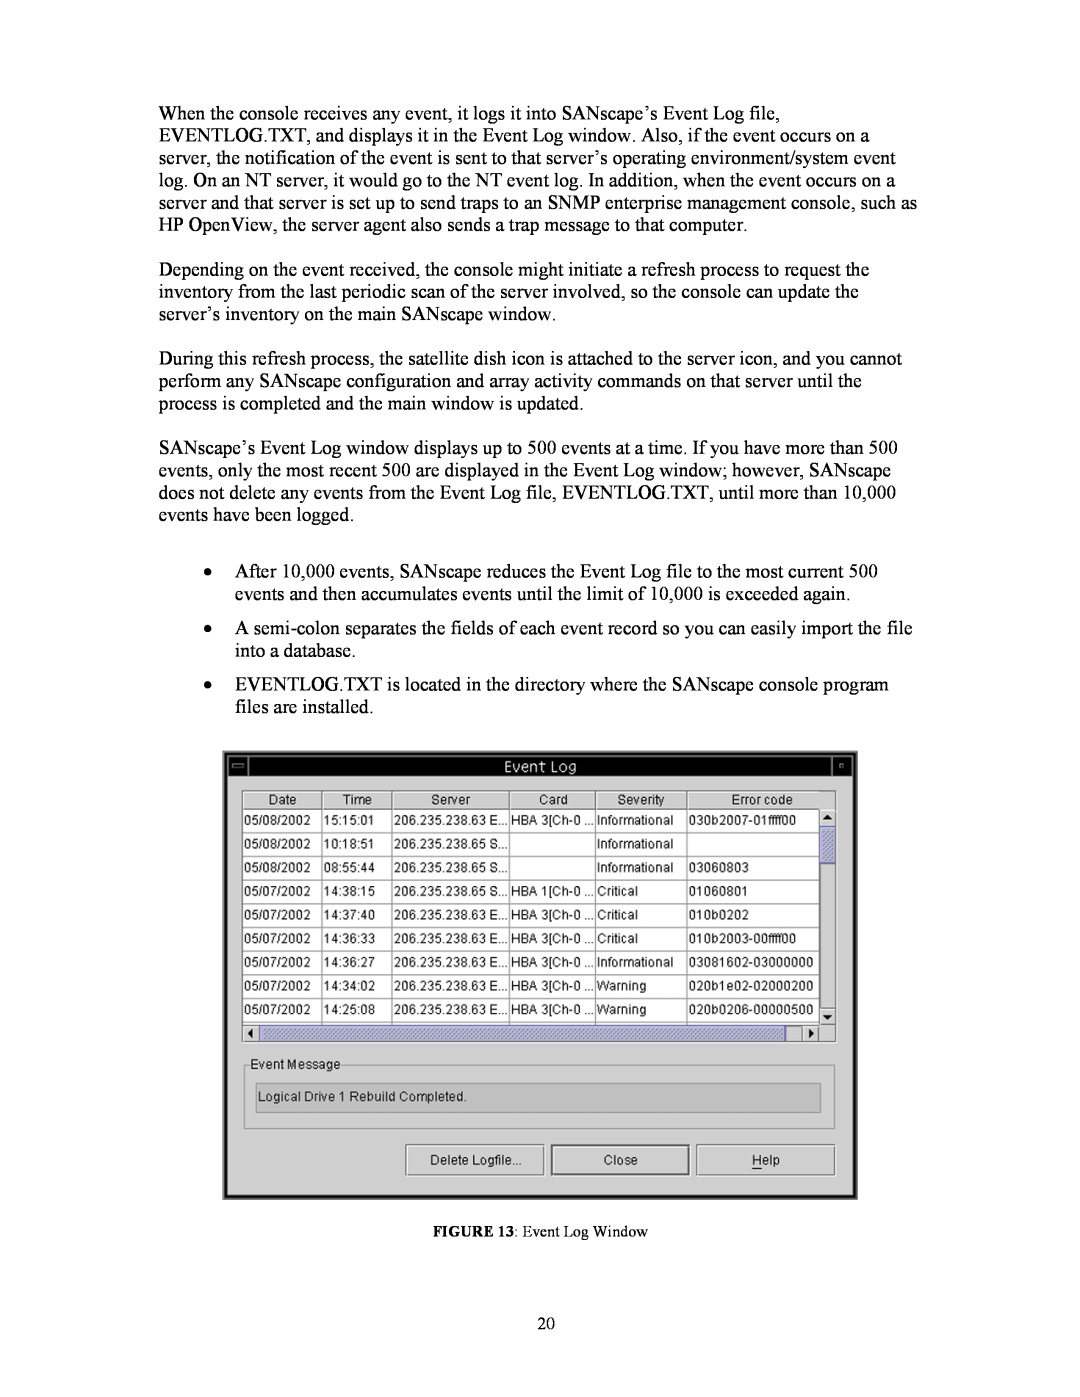 Dot Hill Systems 200 manual Event Log Window 